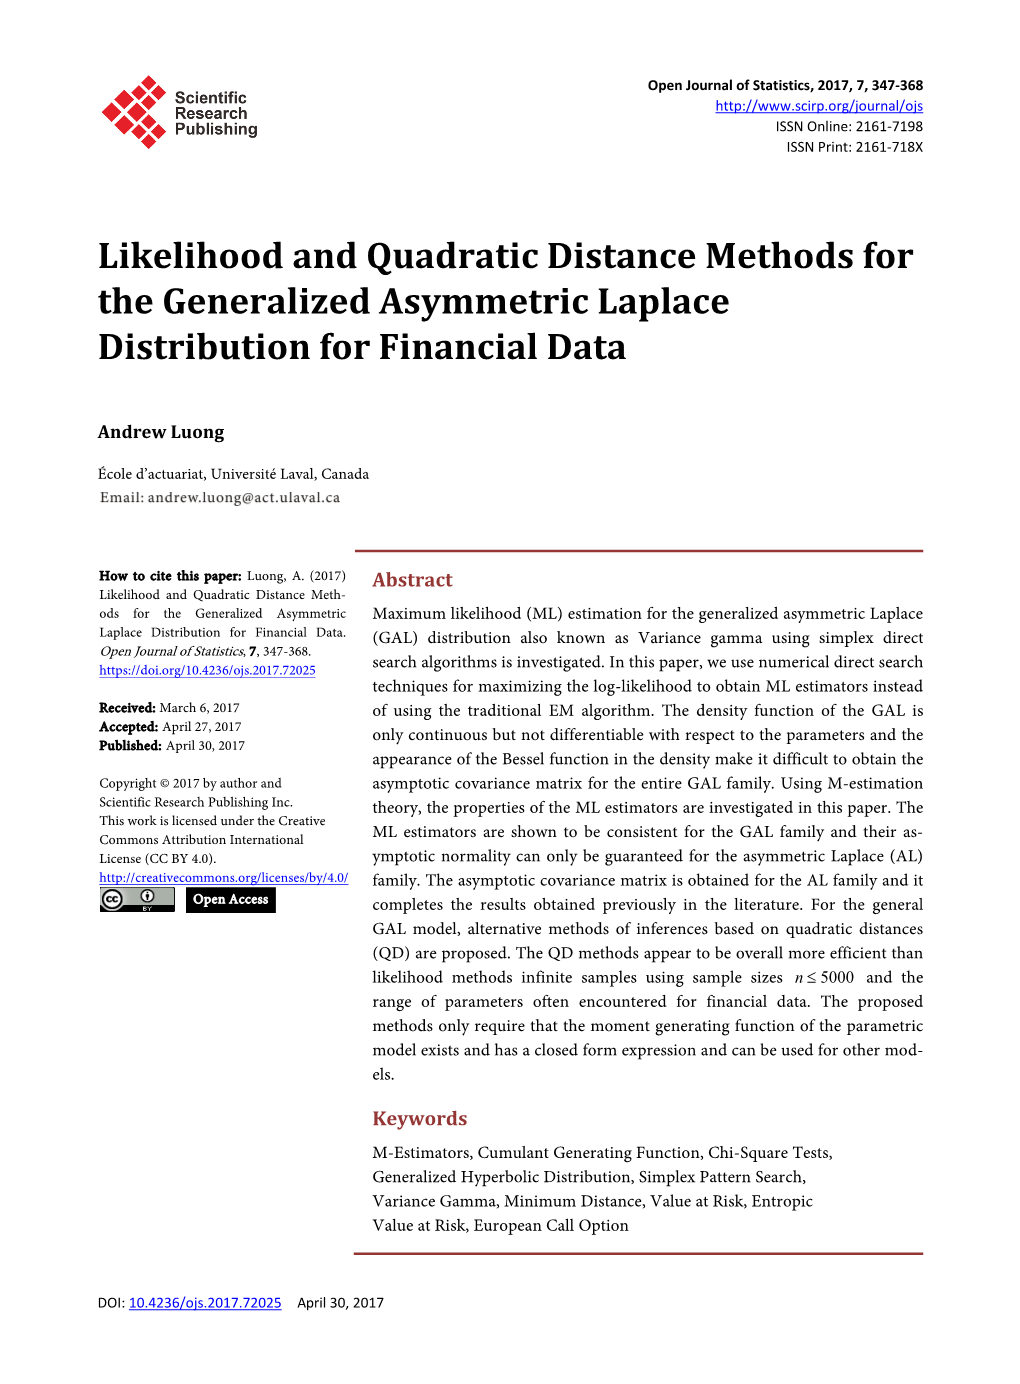 Likelihood and Quadratic Distance Methods for the Generalized Asymmetric Laplace Distribution for Financial Data